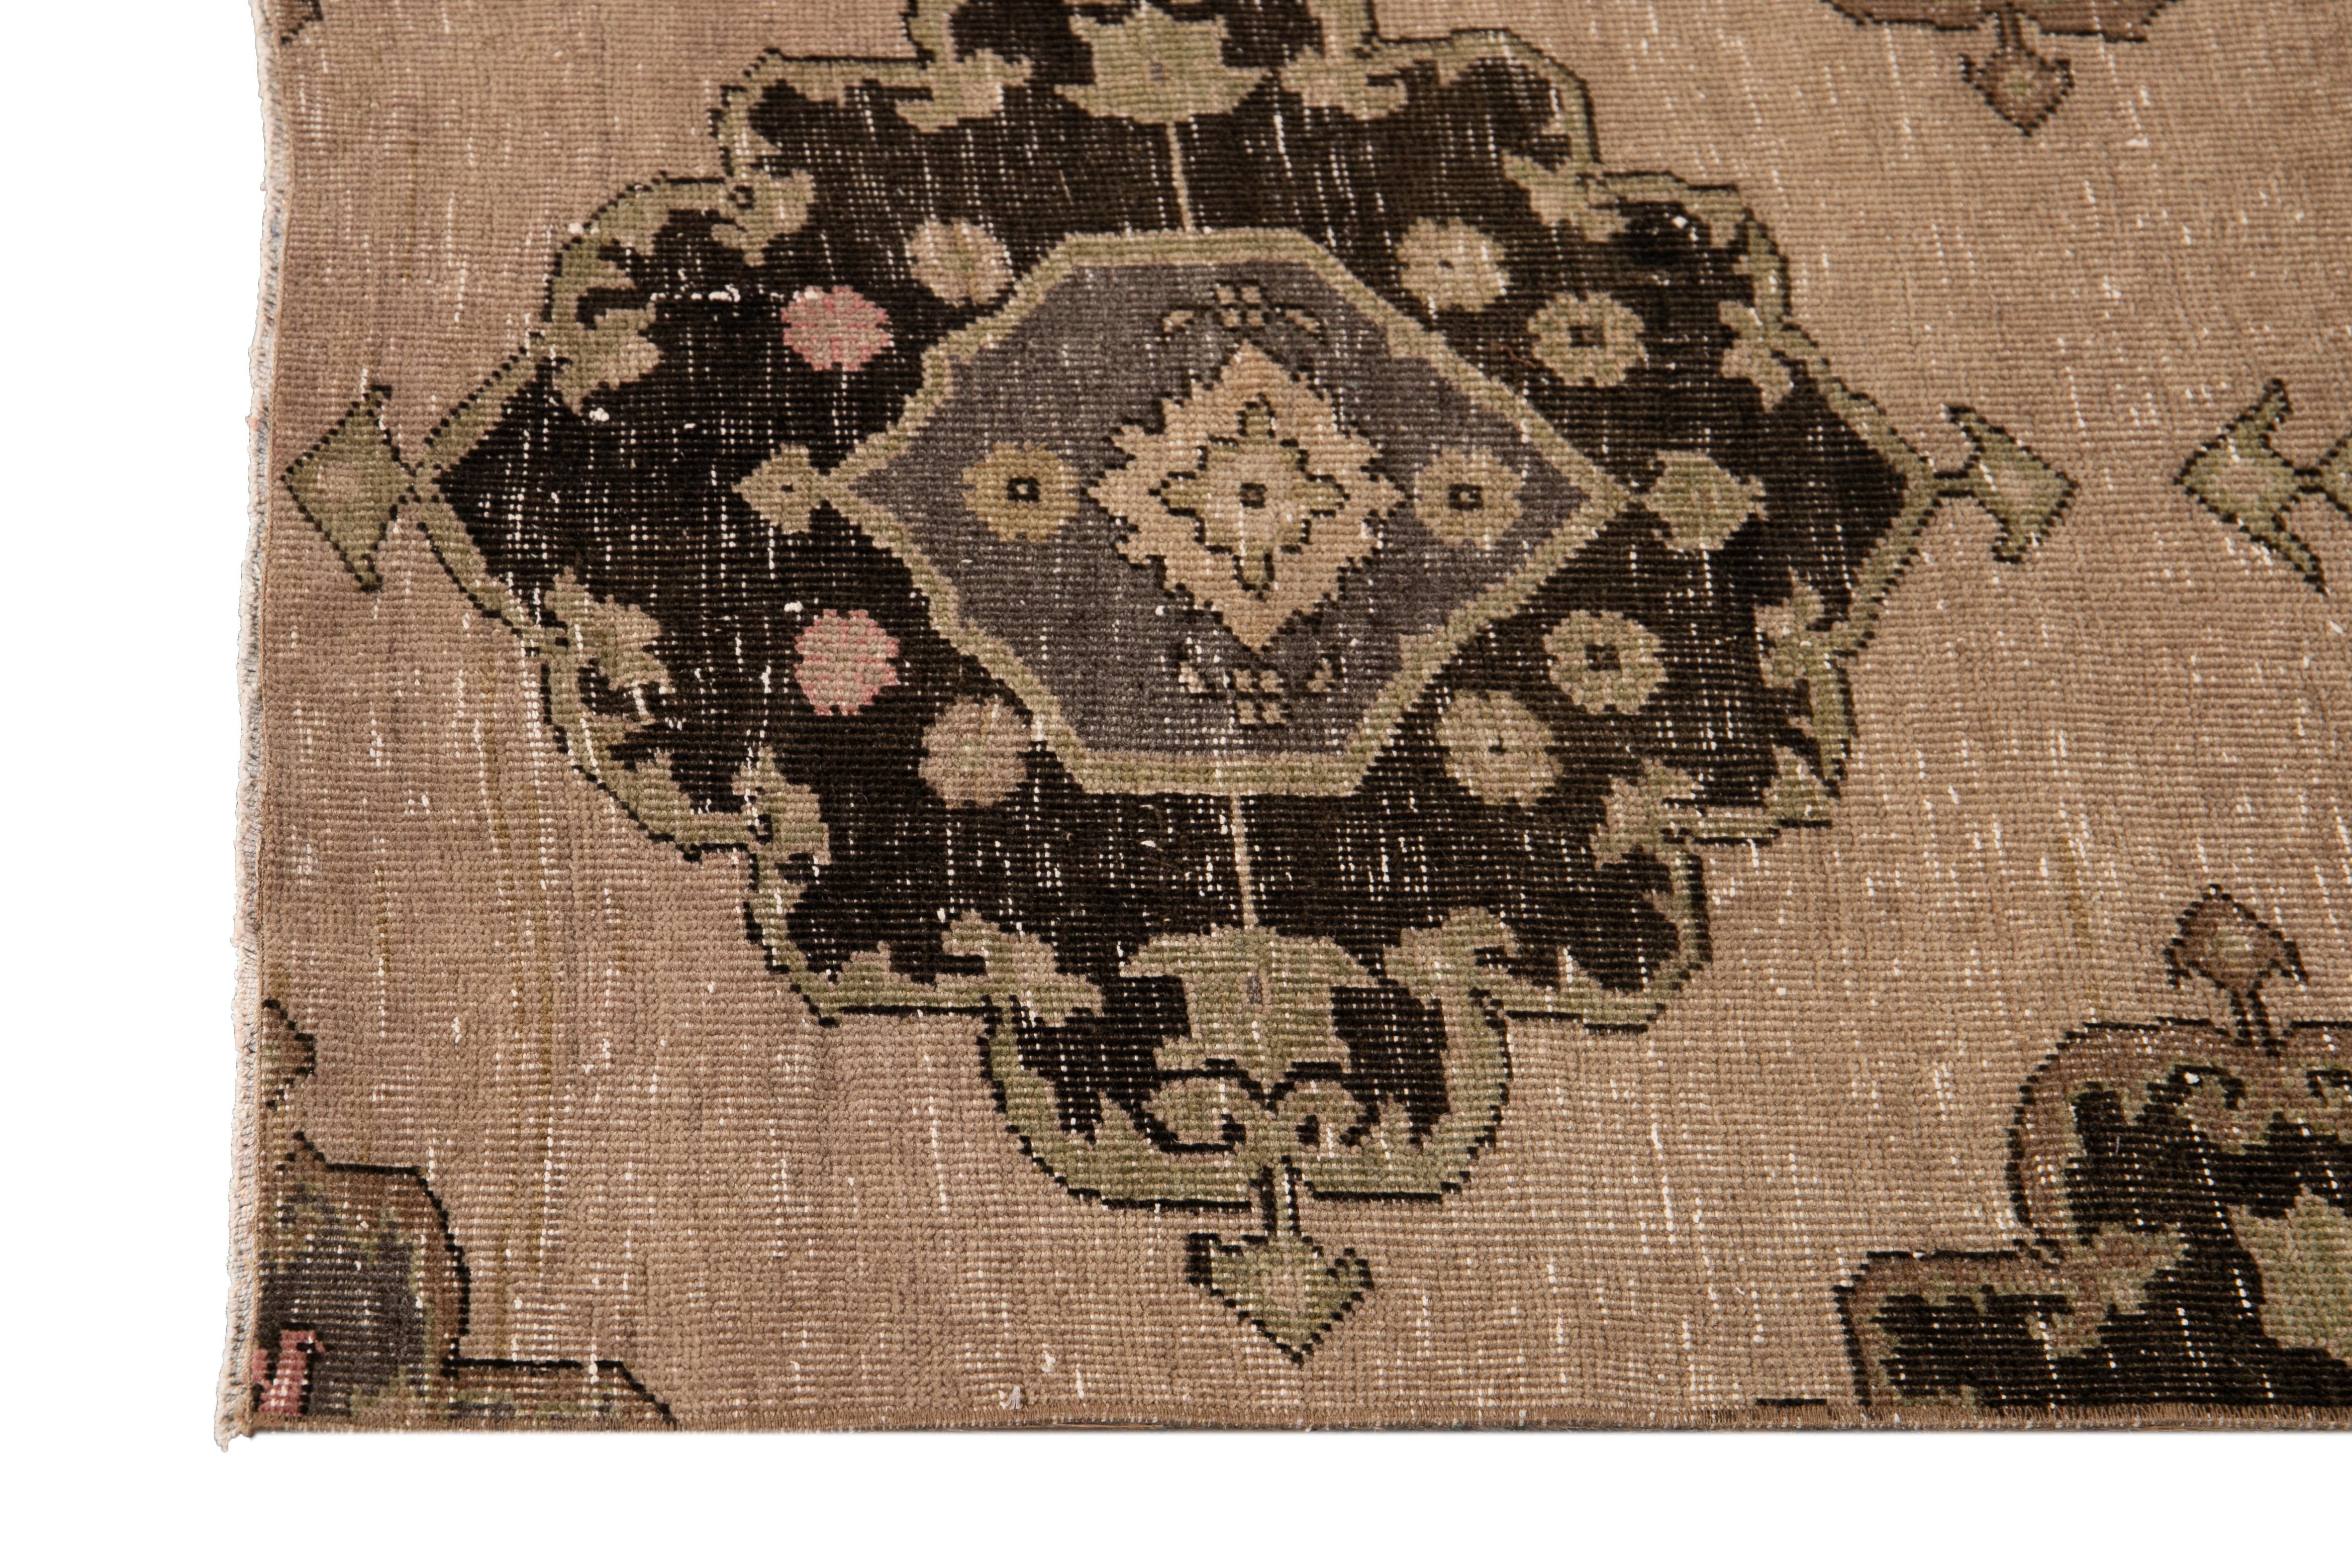 Beautiful antique wool runner rug, hand knotted wool with a dark tan field, light and dark brown accents in an allover muti medallion geometric design

circa 1930

This rug measures 2' 10